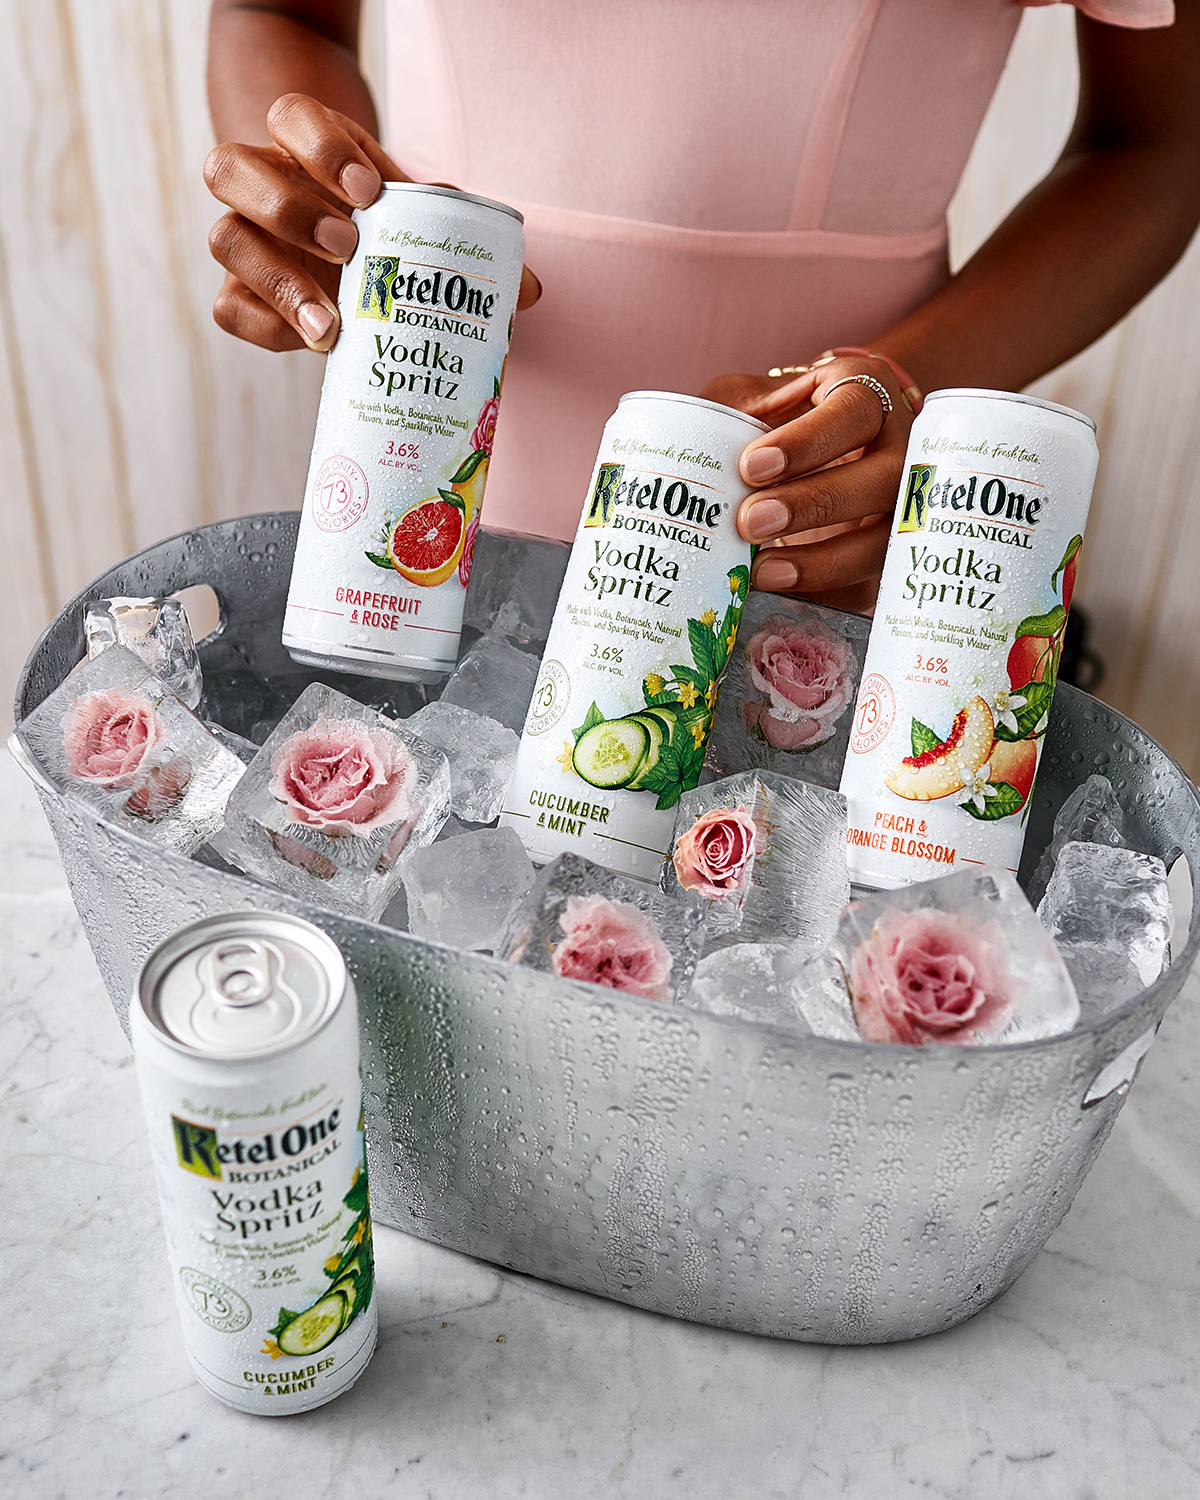 The first-of-its-kind Ketel One Botanical Vodka Spritz has no carbs, no added sugar, no artificial flavors or sweeteners, is made from 100% non-GMO grain and is only 73 calories per serving